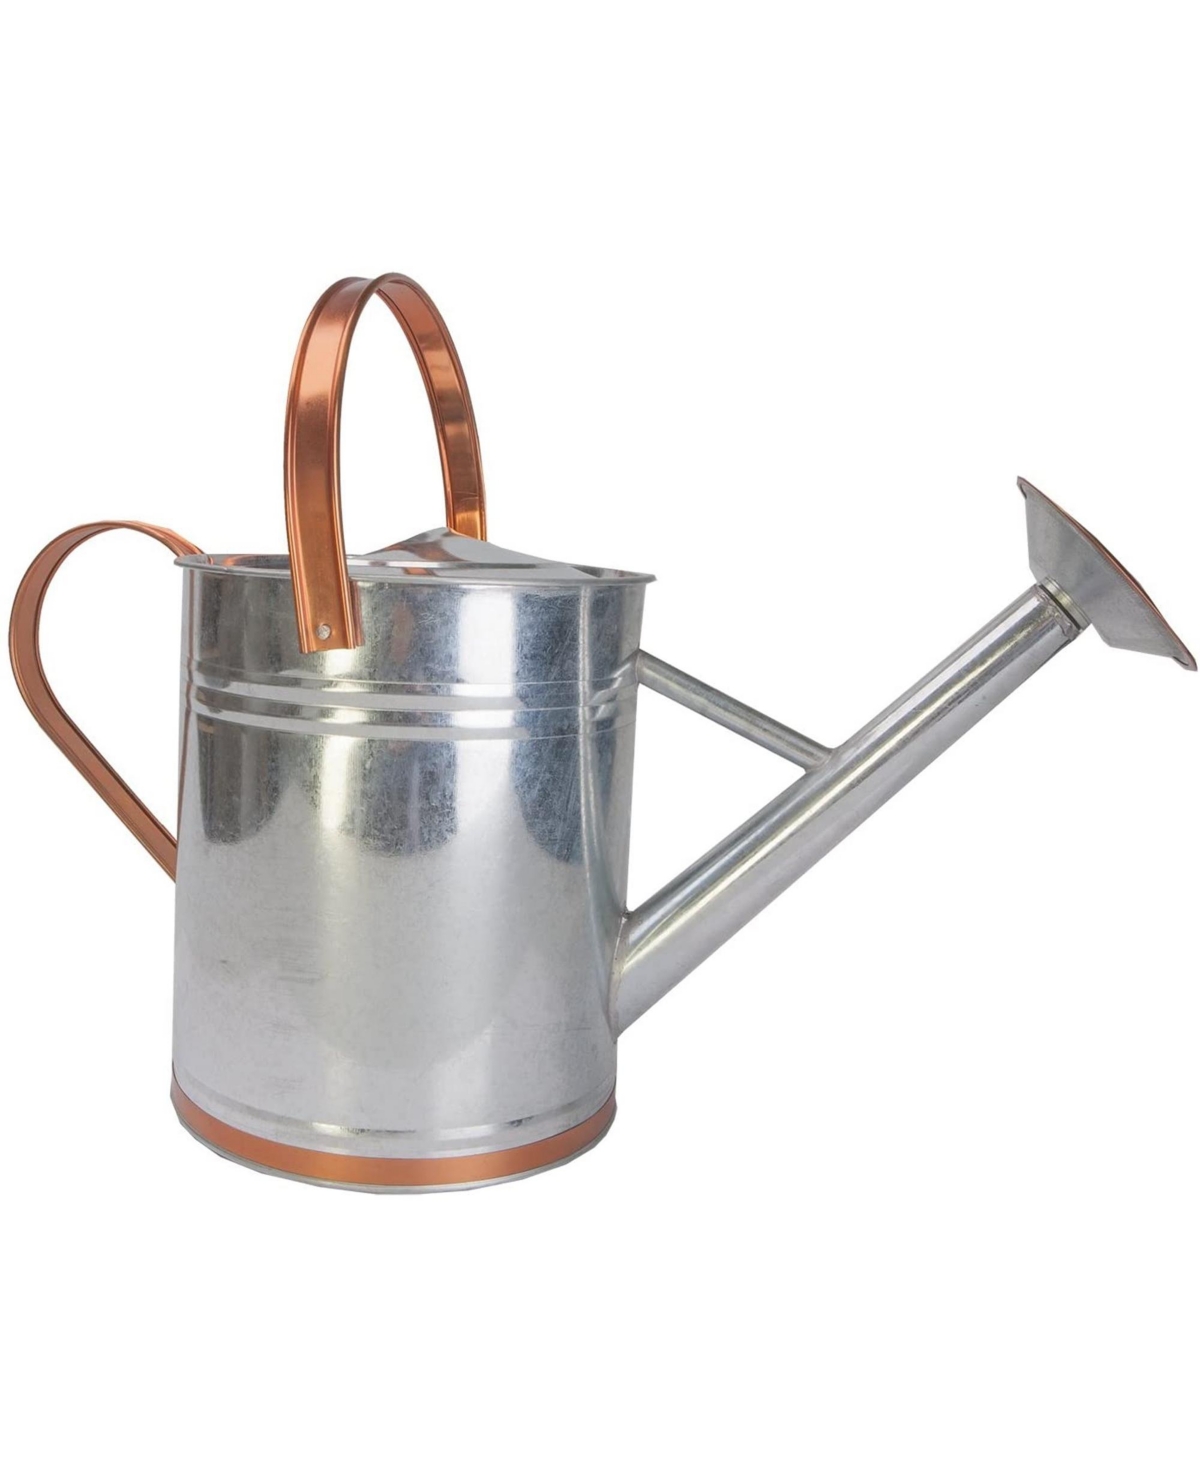 Metal Watering Can, Galvanized Silver/Copper Accents, 2 Gal - Brown